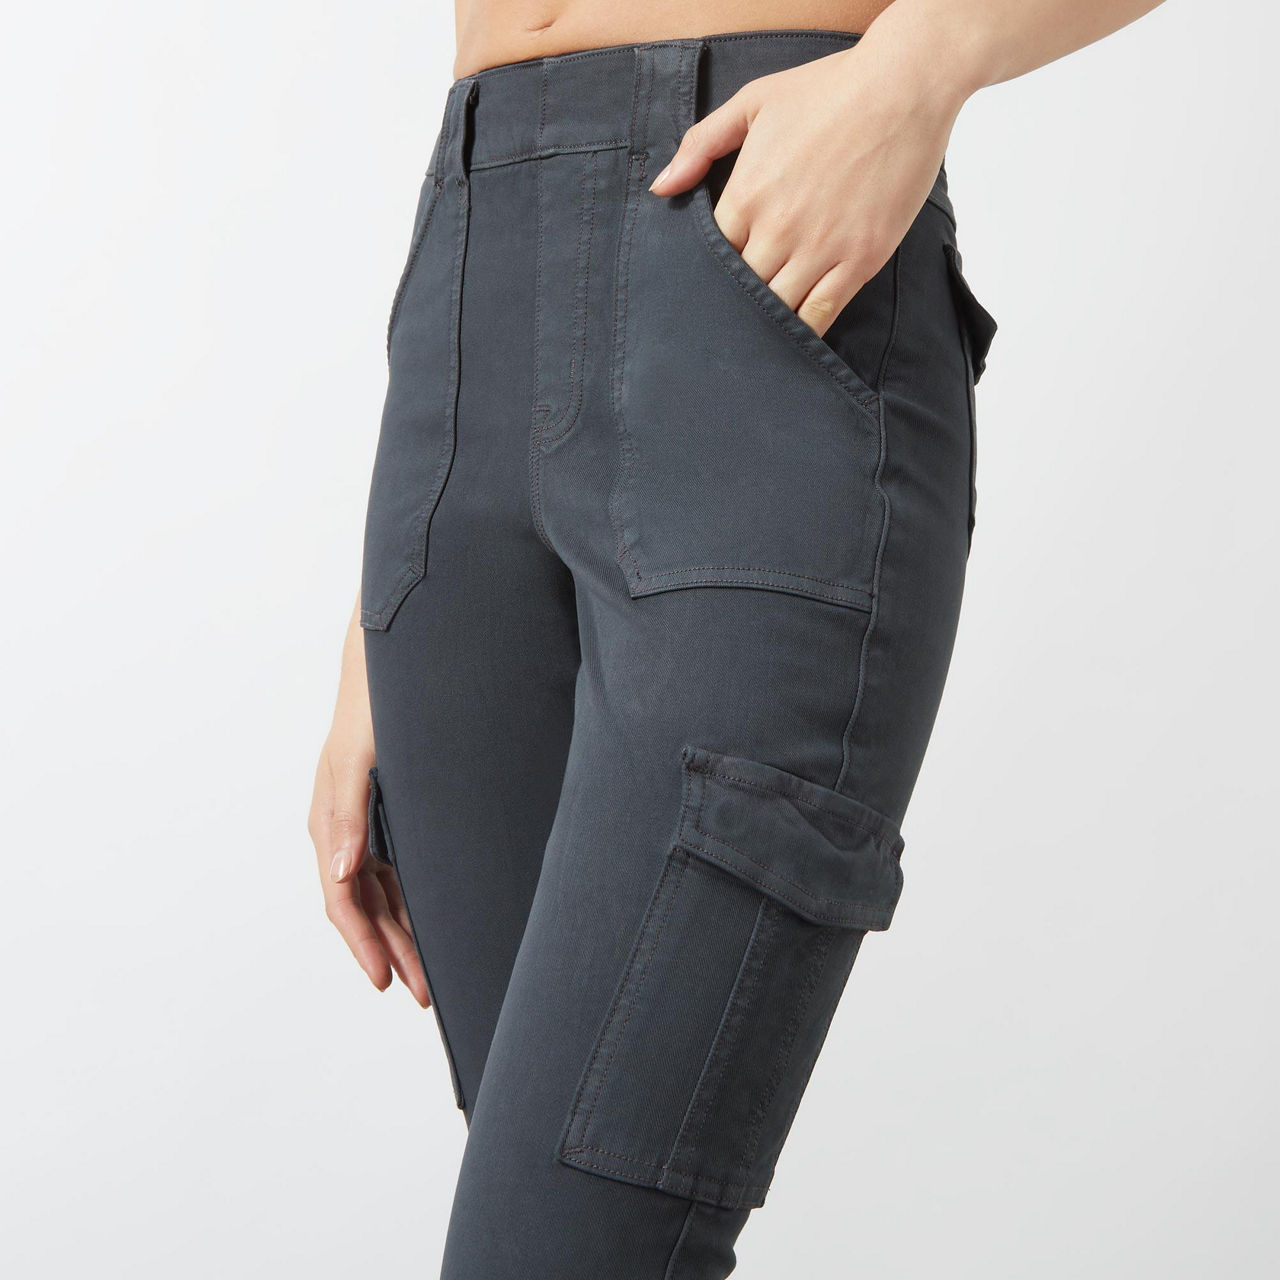 Arnotts Department Store - New Horizons Expertly crafted with seamless  technology, the Spanx Cargo Pants are contemporary in design, to give your  wardrobe a seasonless staple. Enjoy free standard delivery on orders